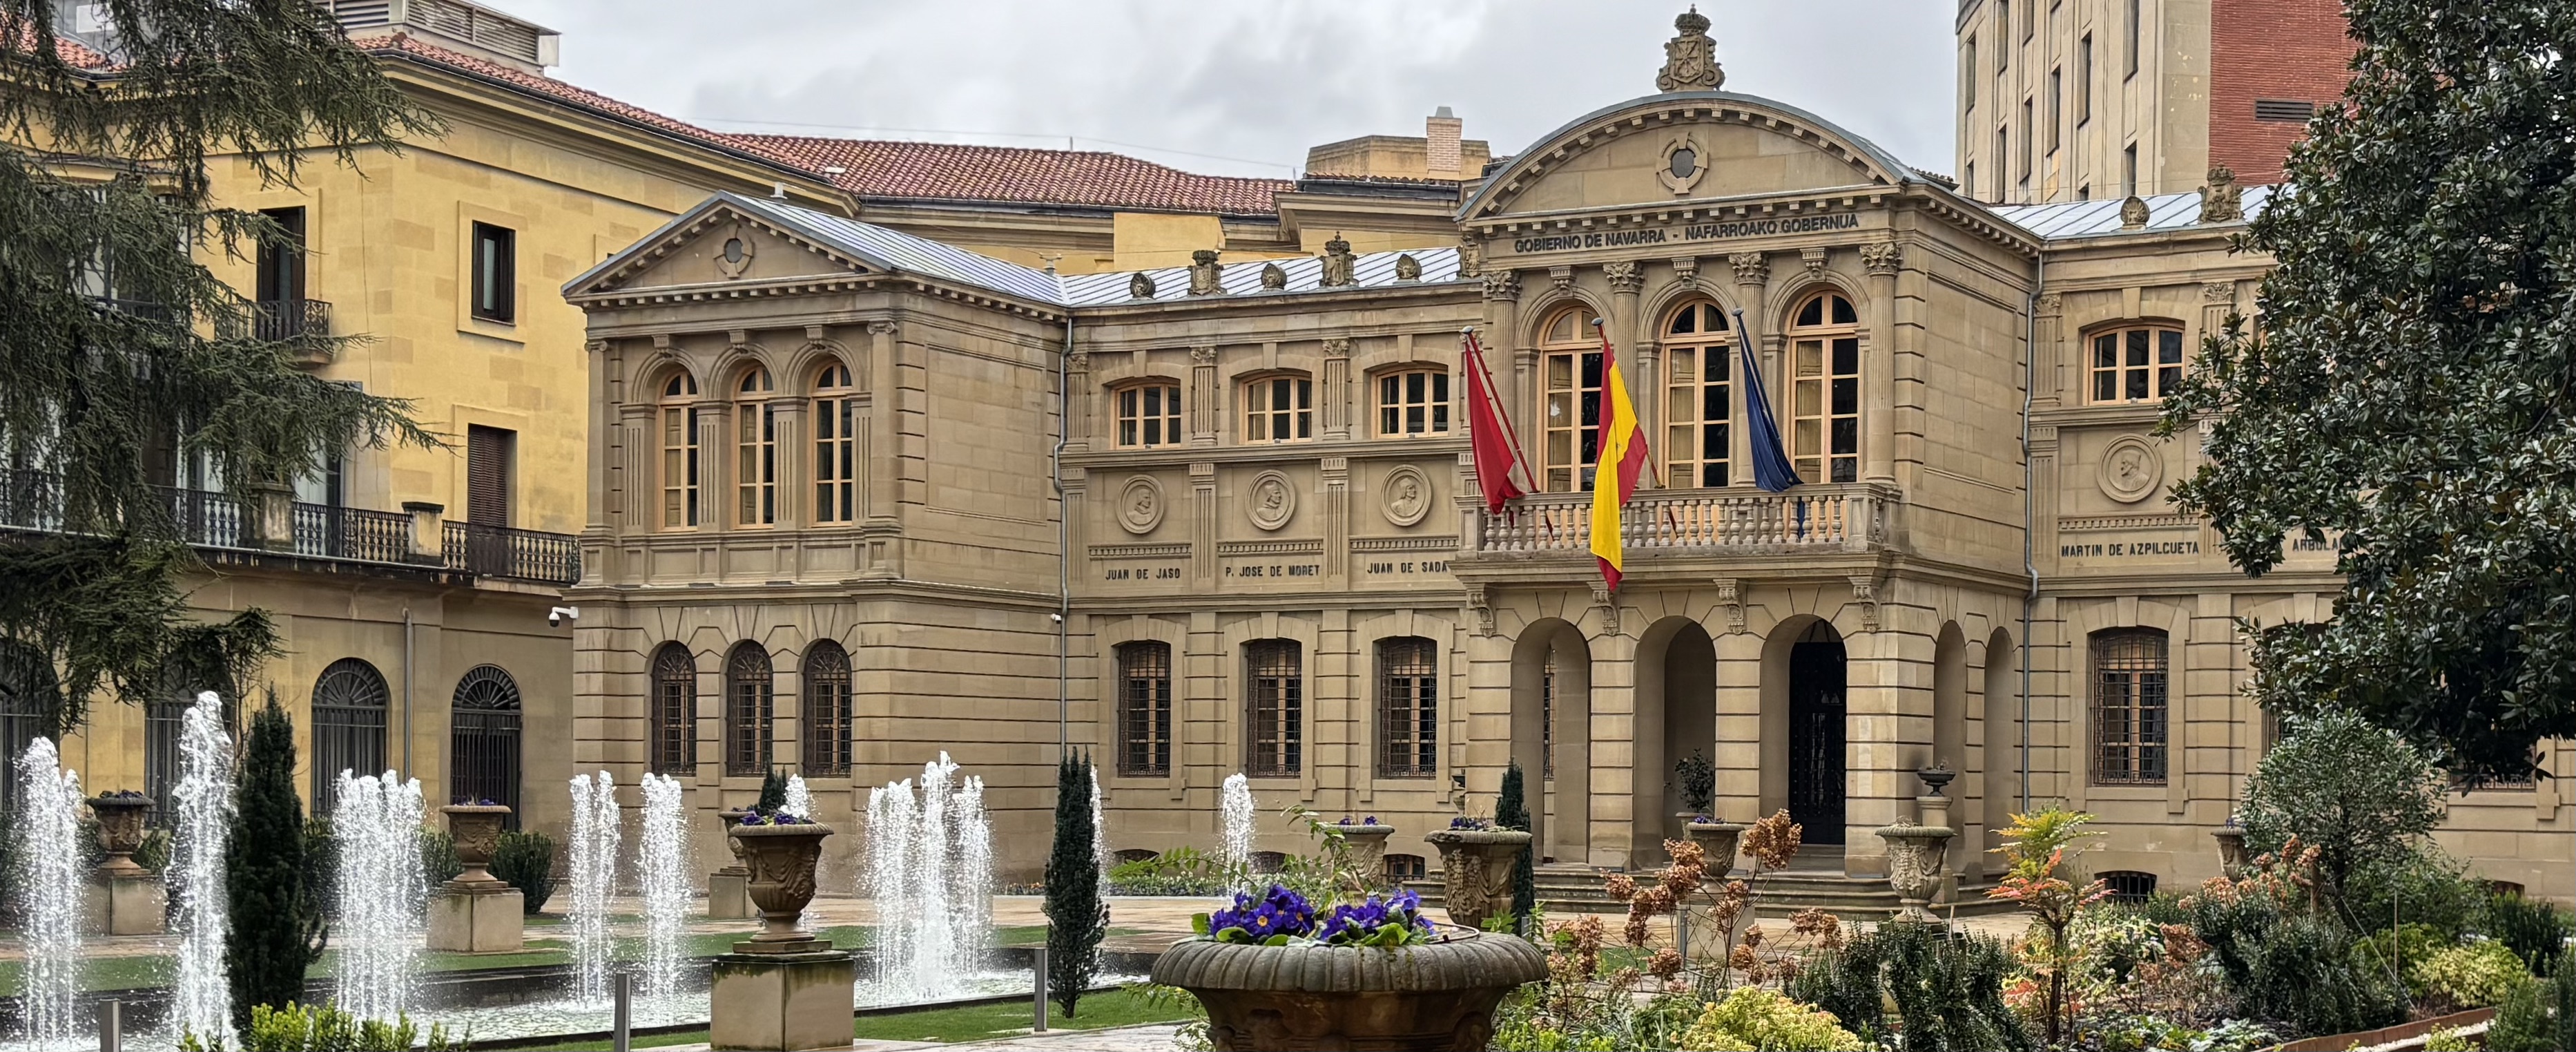 The Navarra Parliament building in Pamplona